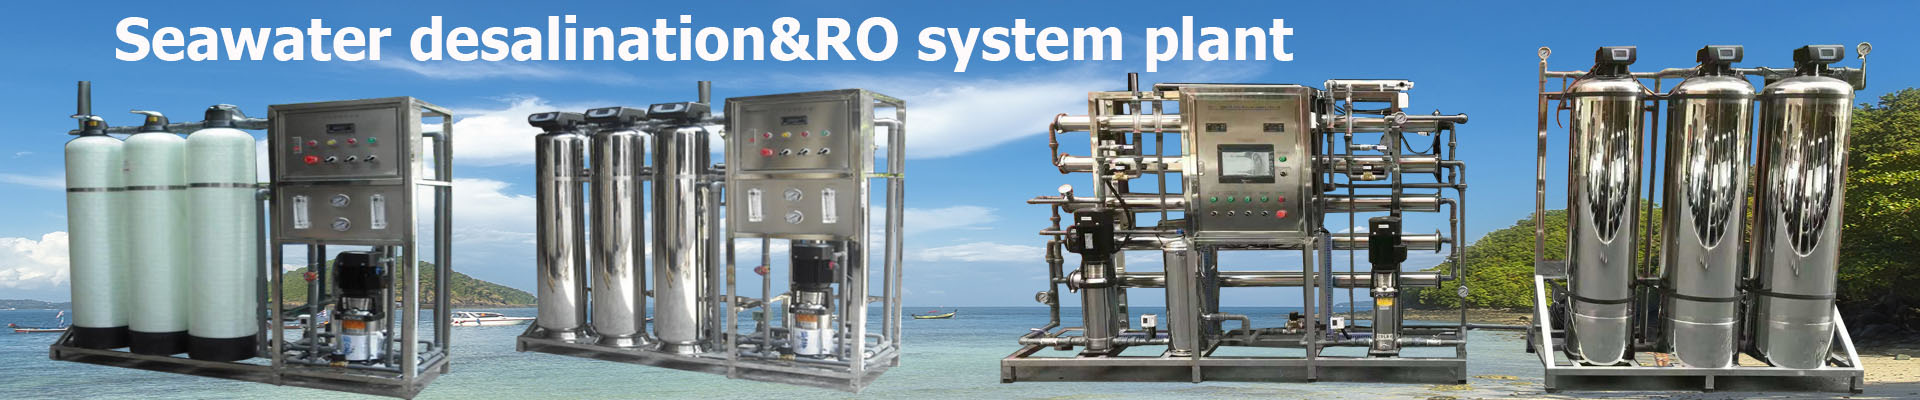 Seawater desalination & RO system plant